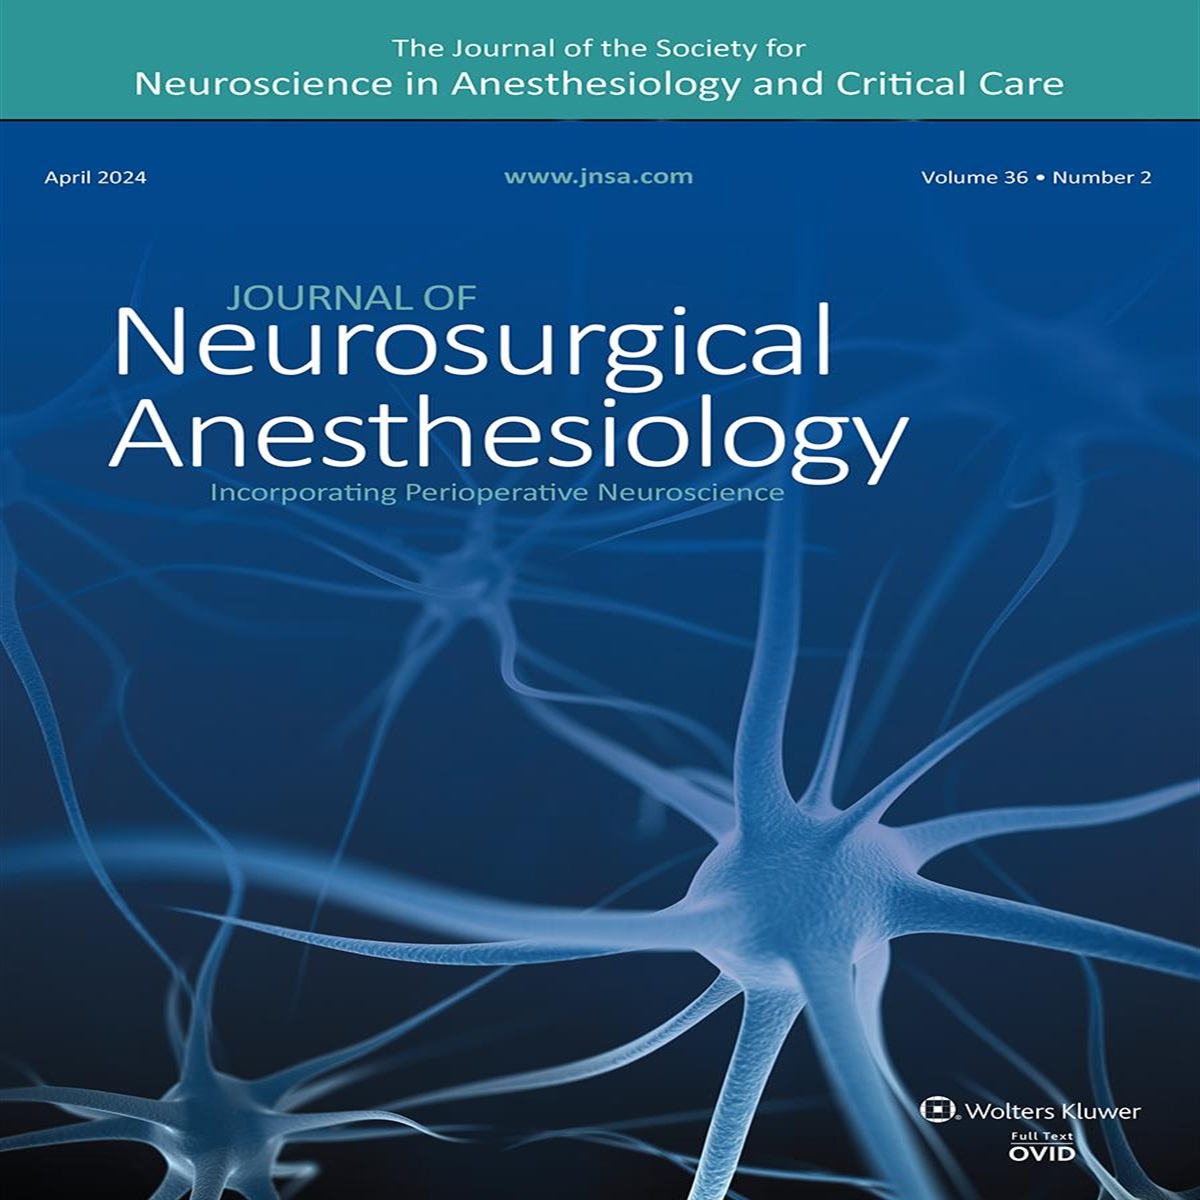 Geographic Authorship Trends in the Journal of Neurosurgical Anesthesiology